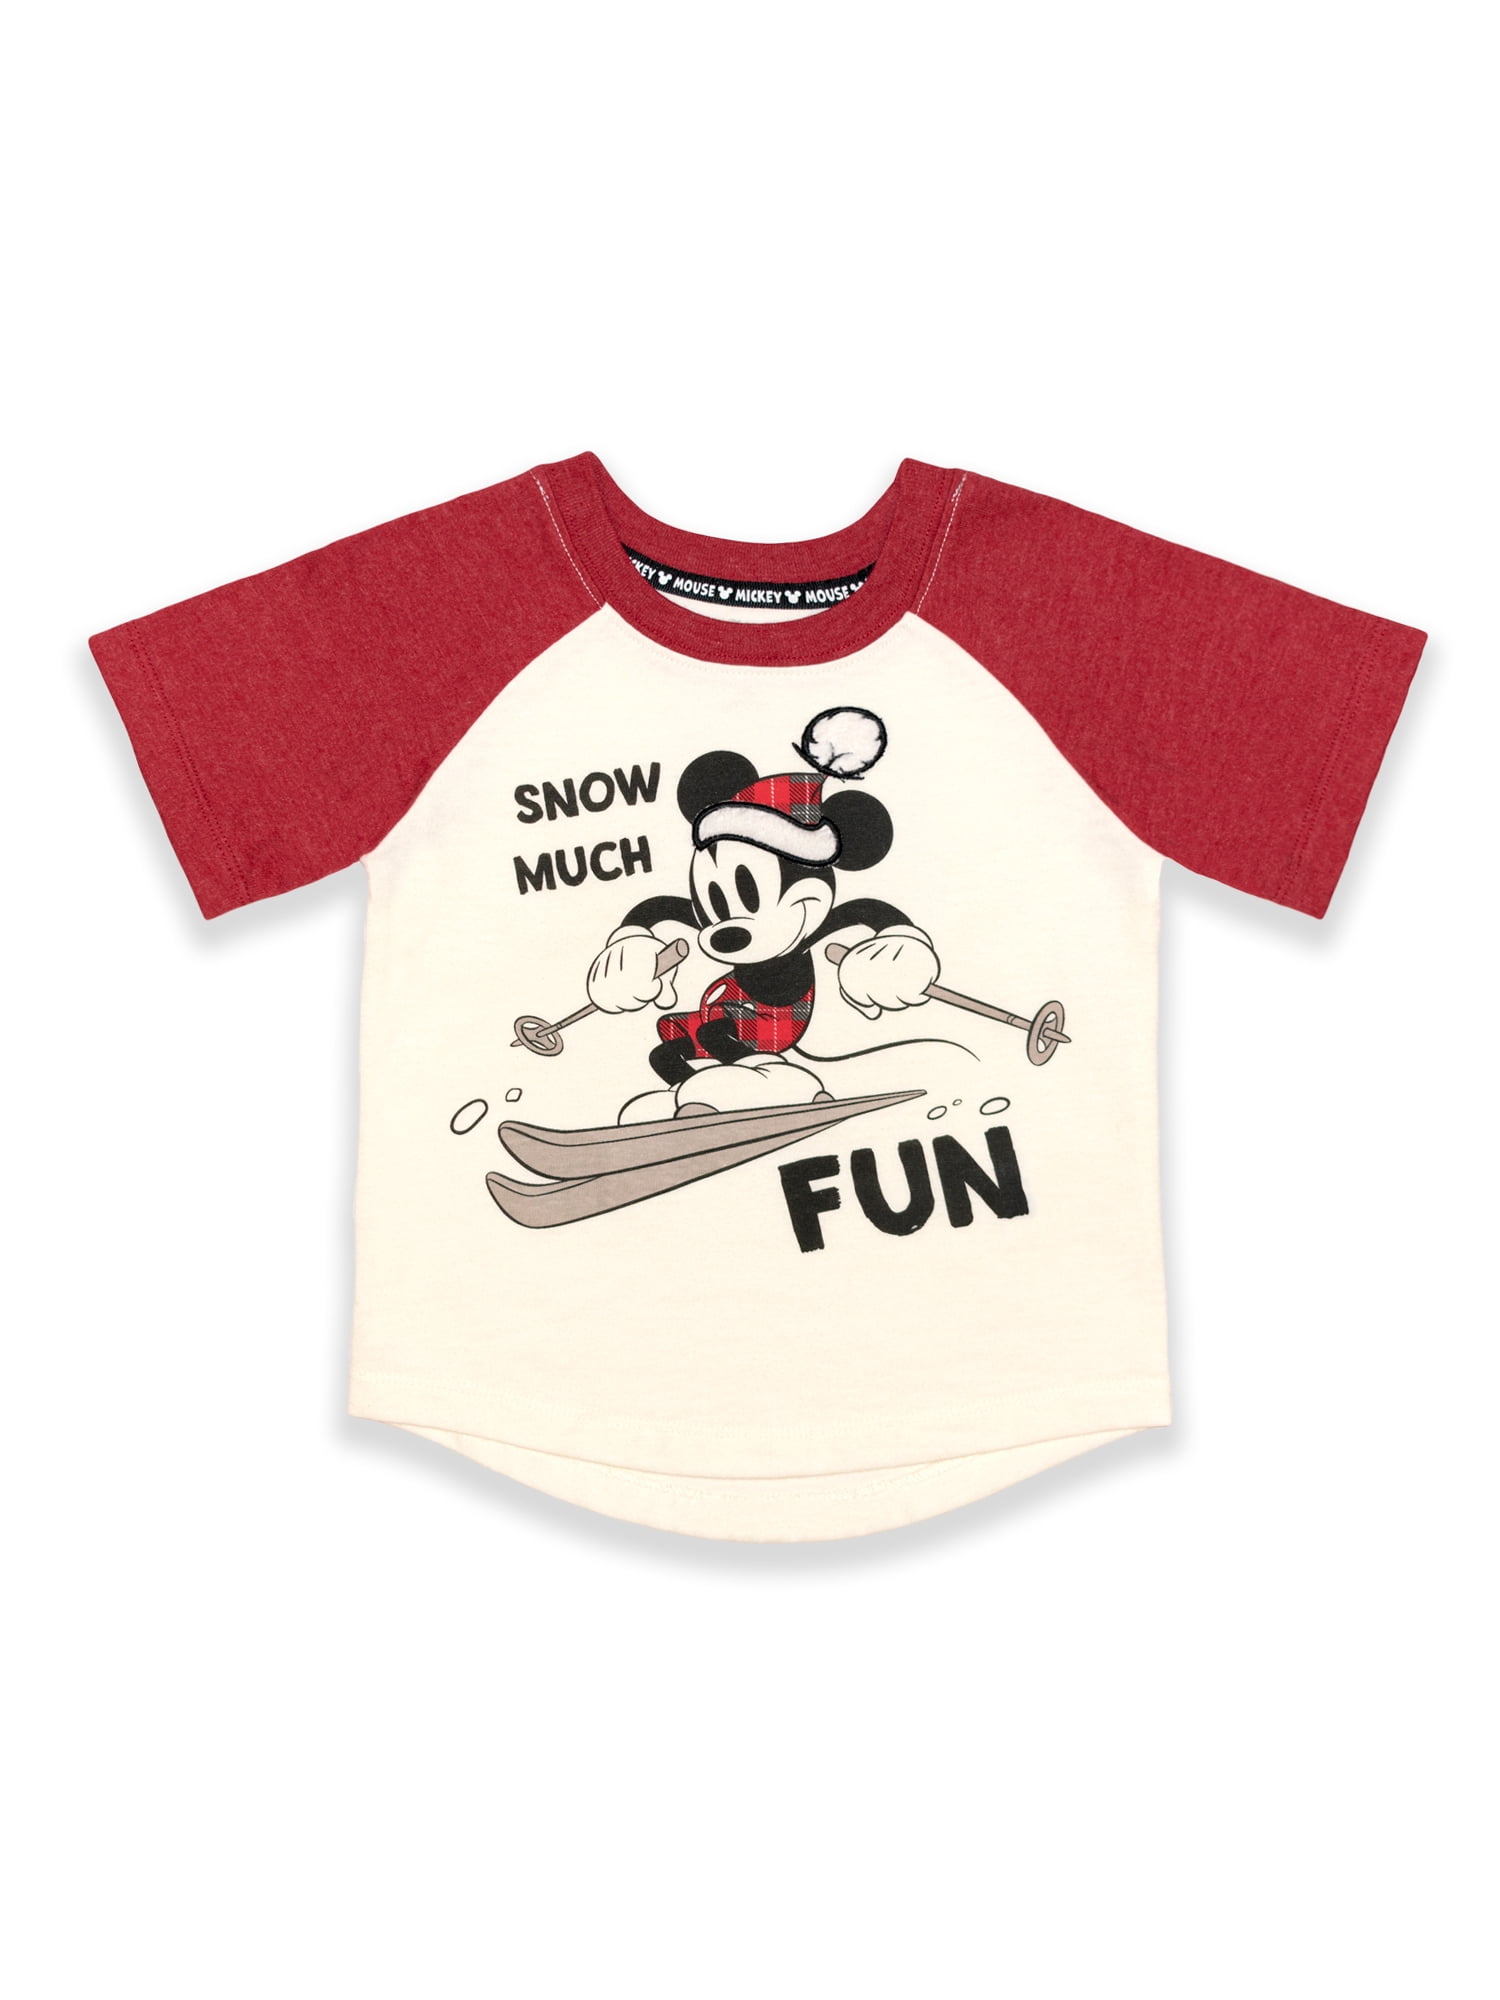 Disney Classic Character Faces Infant/Toddler T-Shirt AVAILABLE SIZES: 12m-5T 